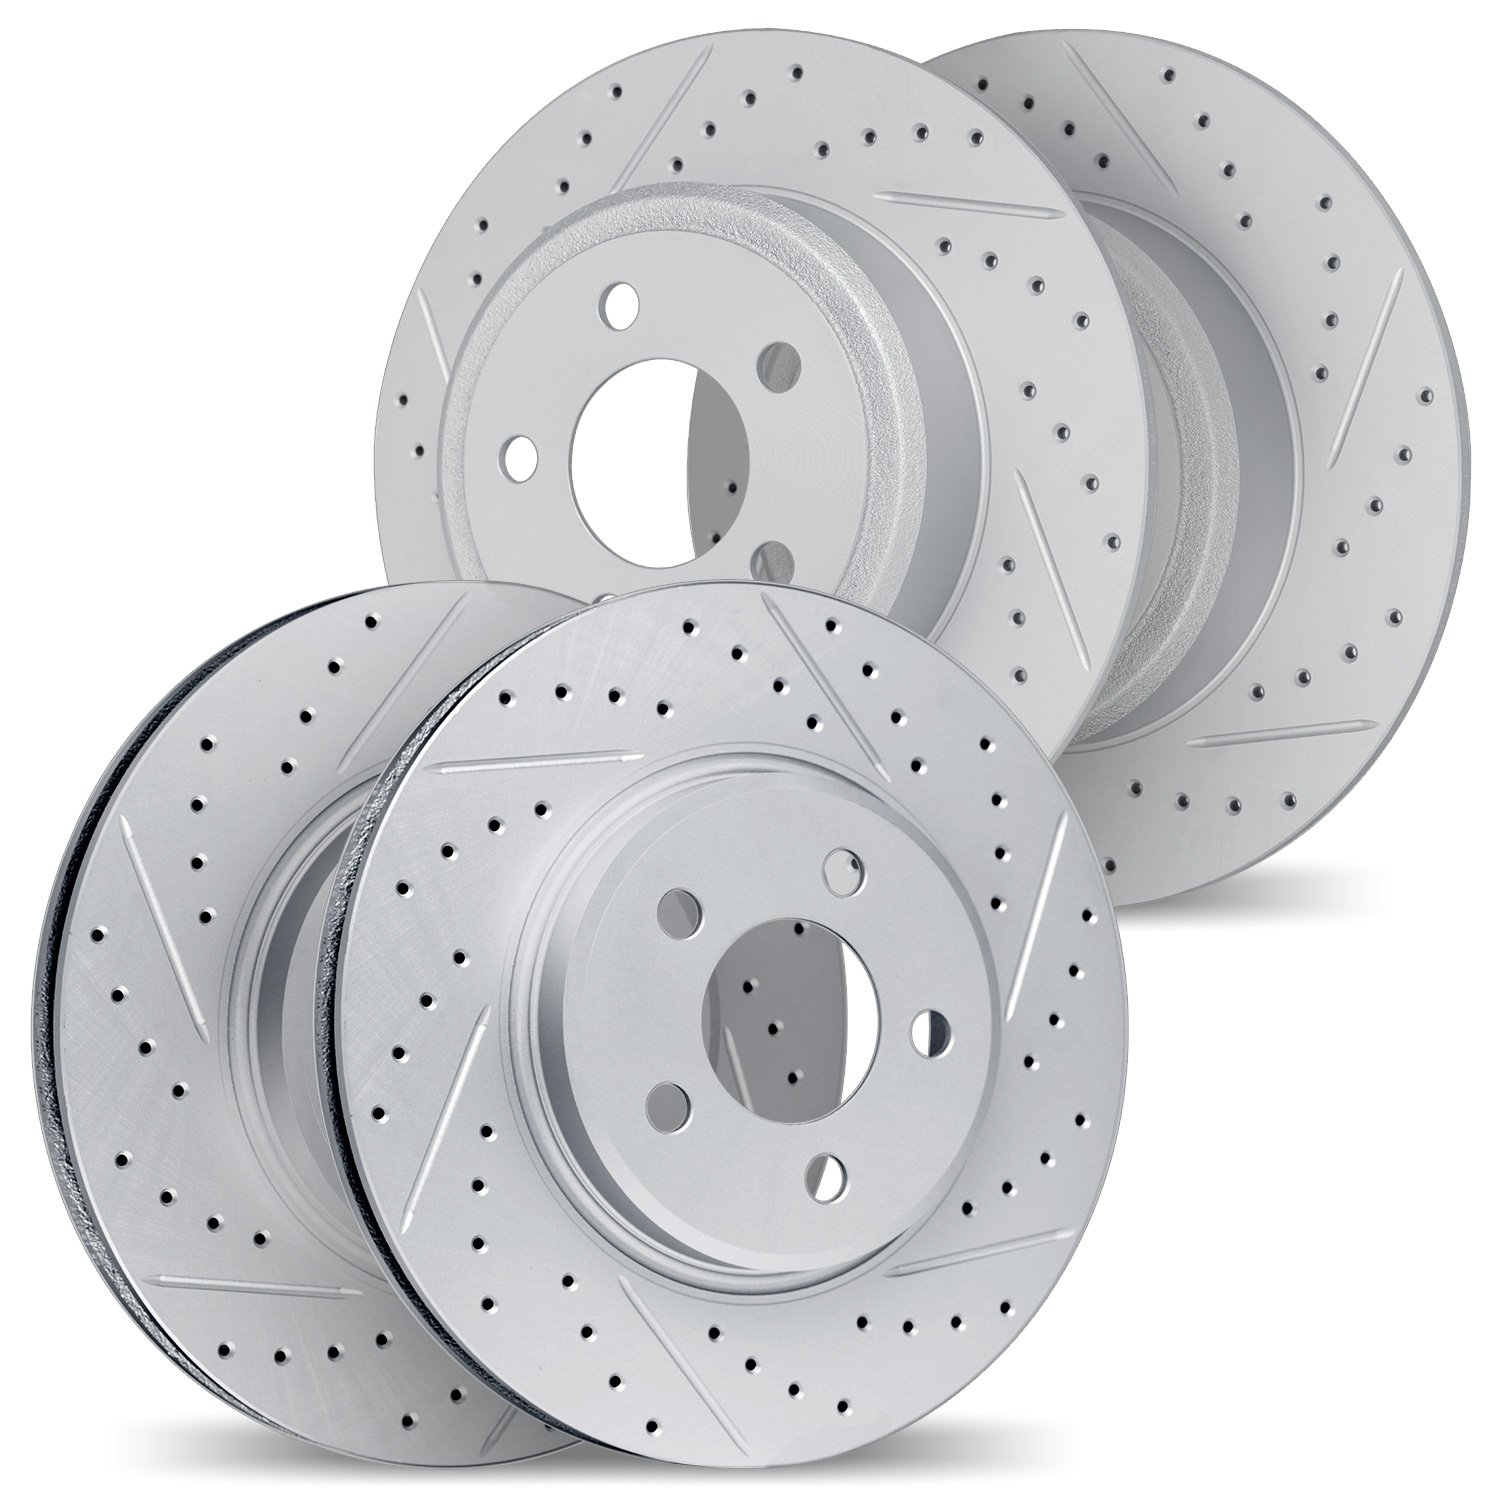 2004-13010 Geoperformance Drilled/Slotted Brake Rotors, Fits Select Subaru, Position: Front and Rear